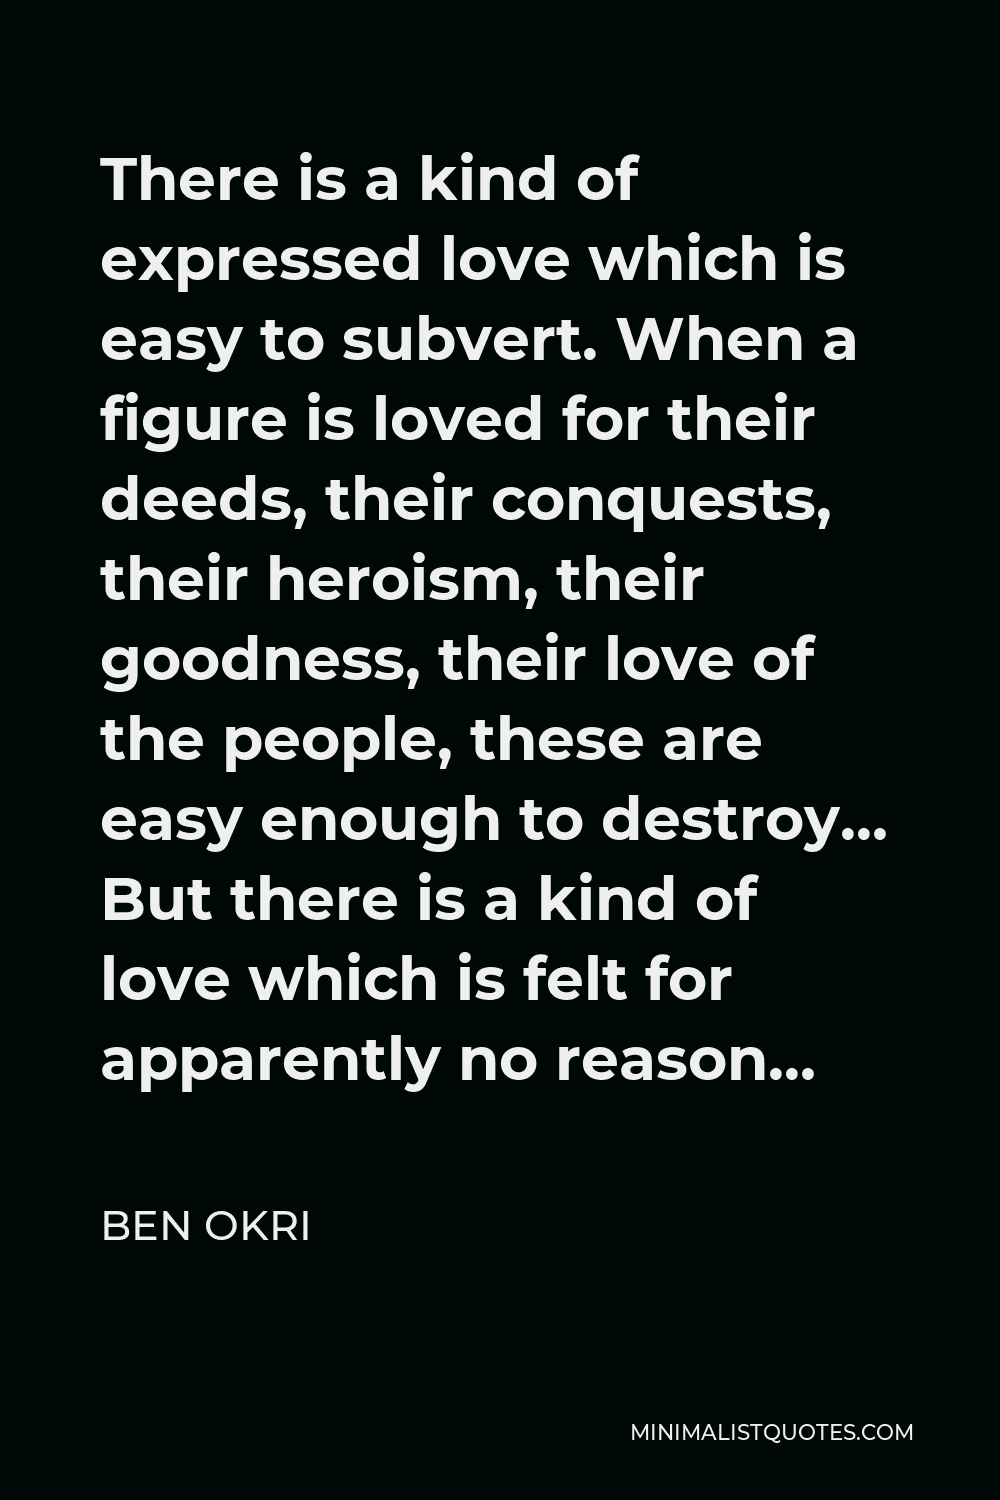 Ben Okri Quote - There is a kind of expressed love which is easy to subvert. When a figure is loved for their deeds, their conquests, their heroism, their goodness, their love of the people, these are easy enough to destroy… But there is a kind of love which is felt for apparently no reason…